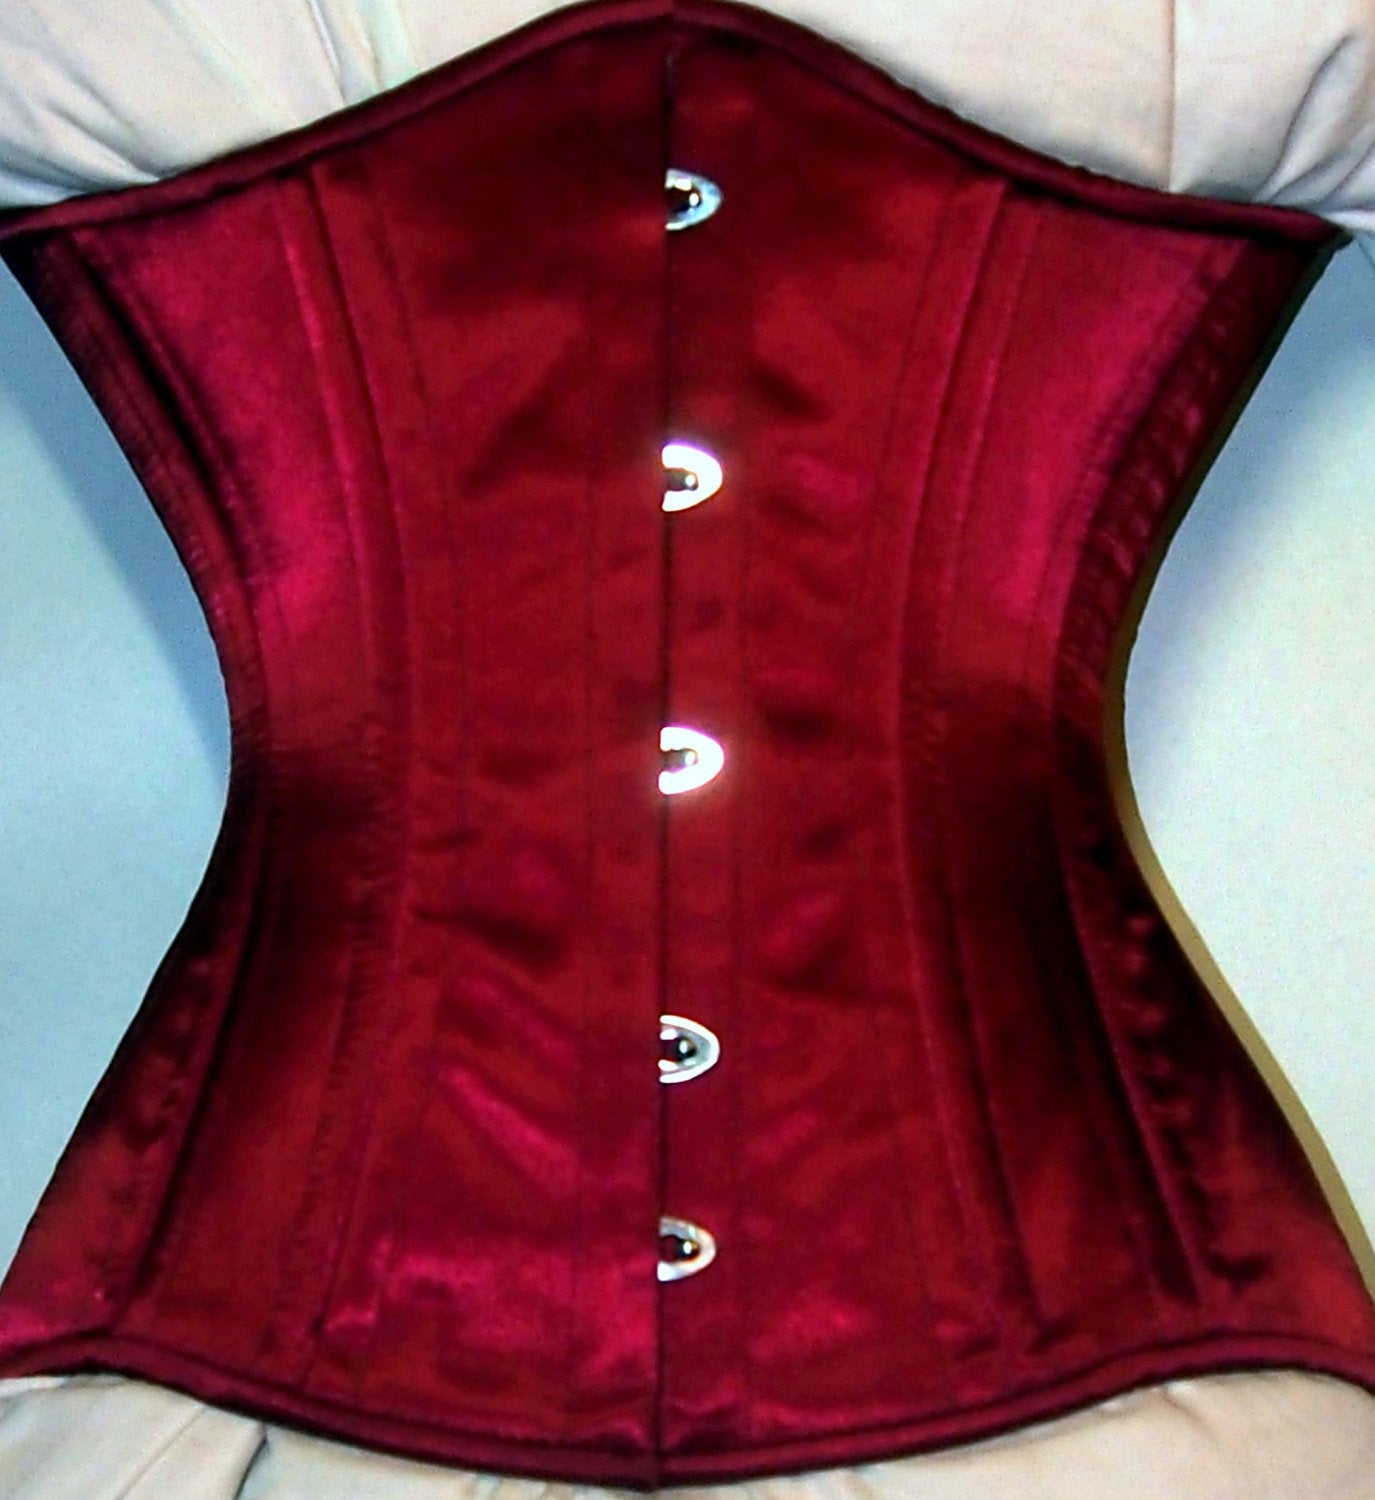 Real double row steel boned underbust corset from satin. Real waist training corset for tight lacing. Gothic, steampunk corset Corsettery